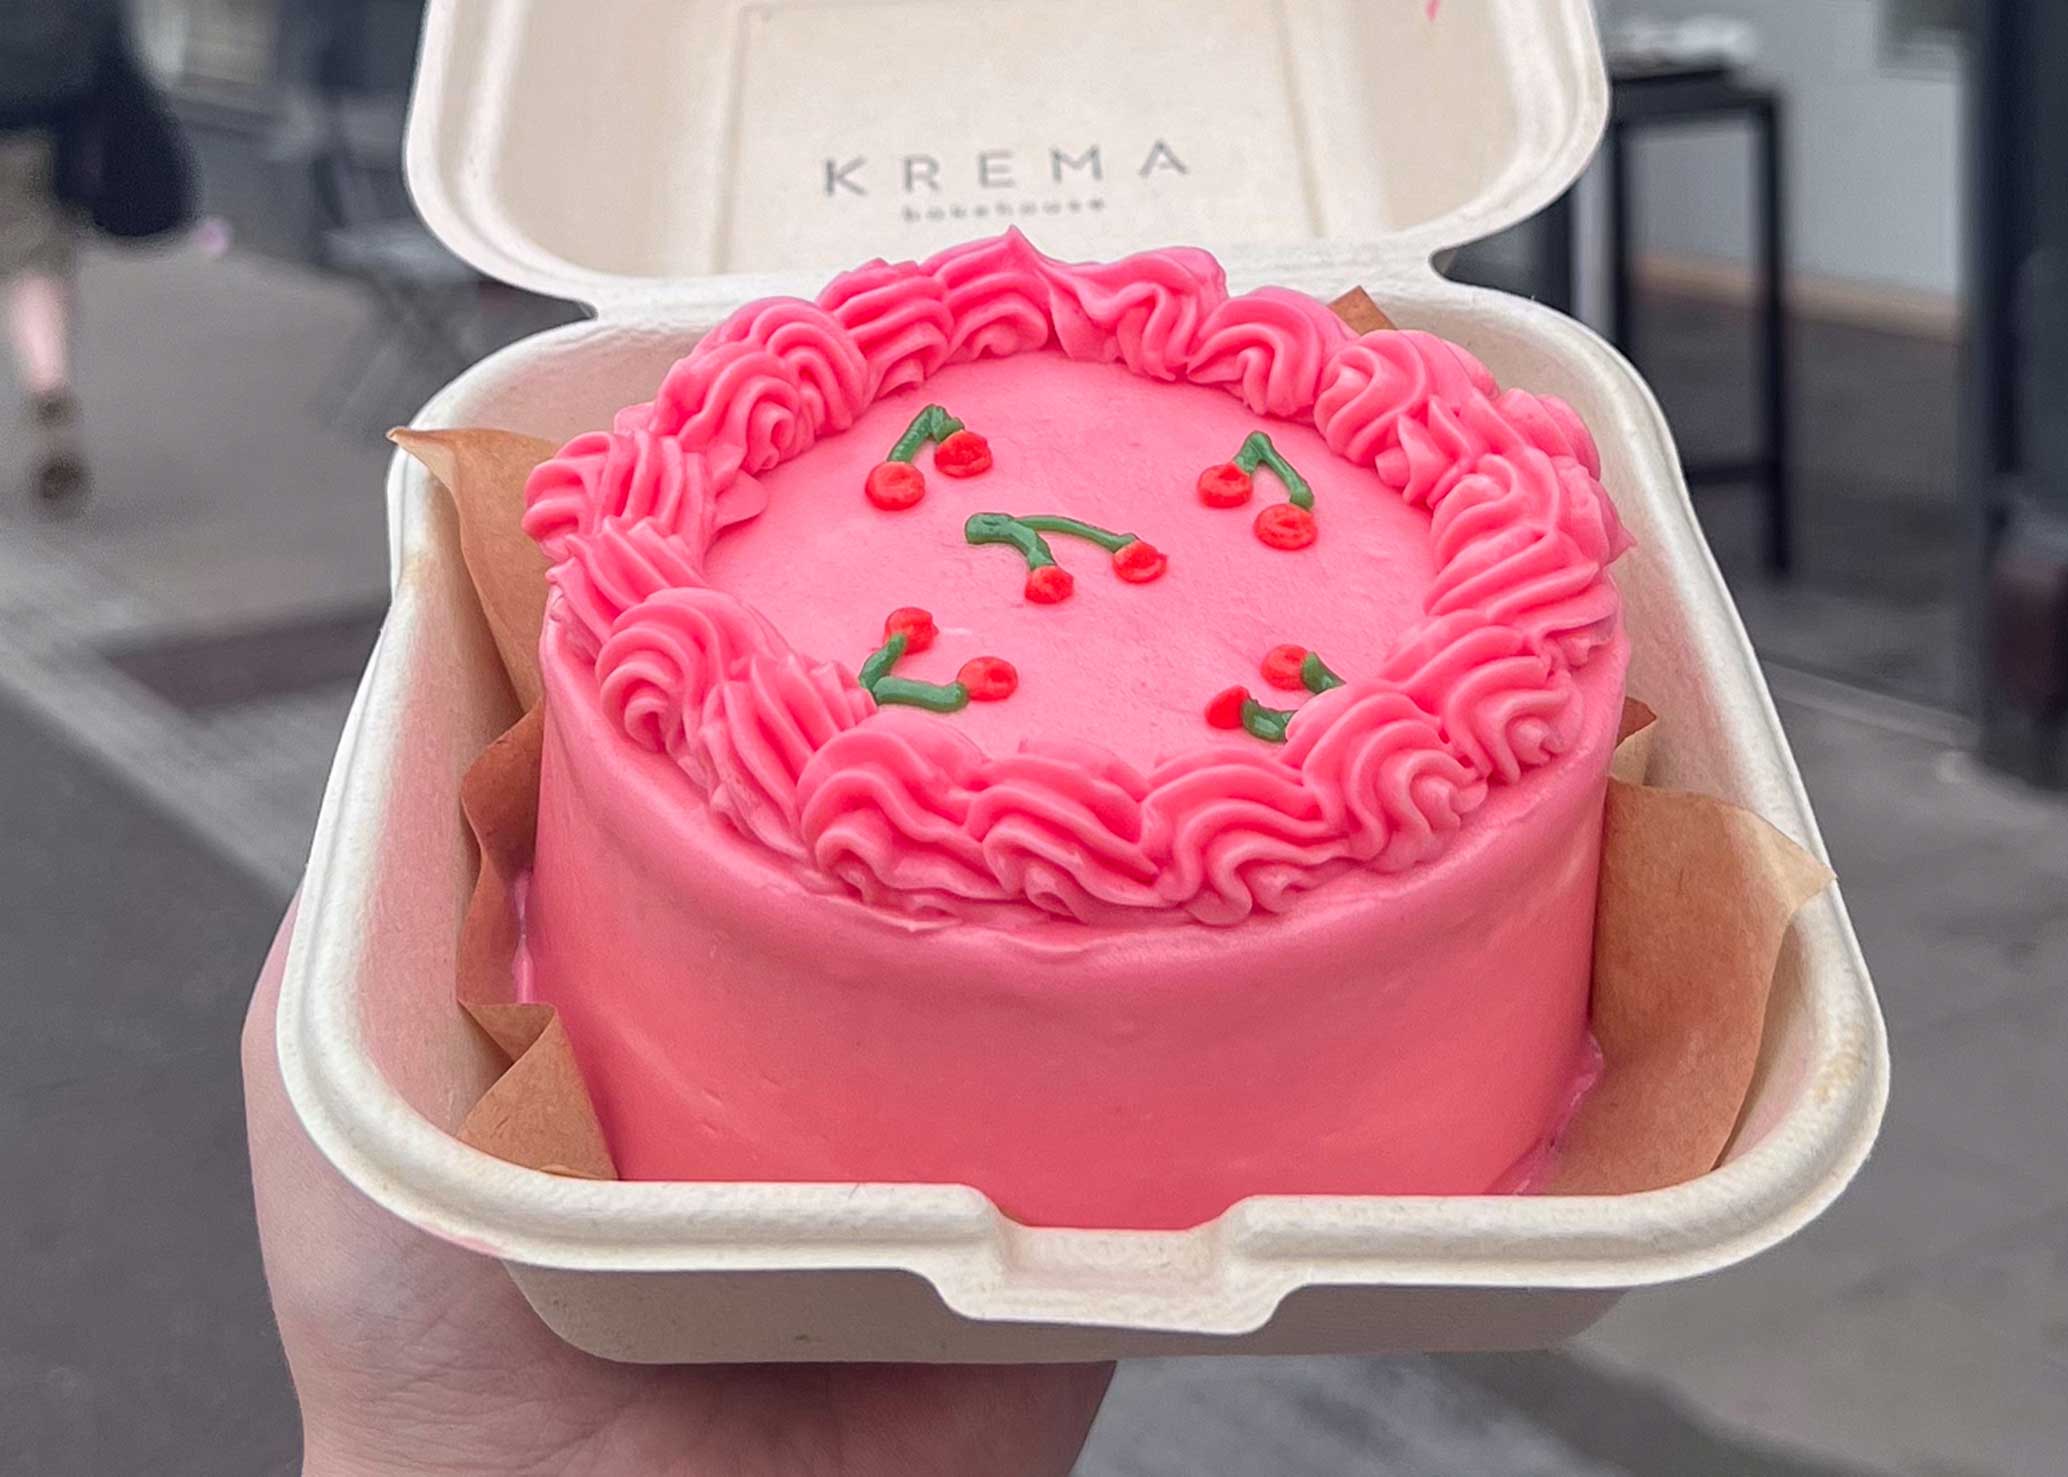 Small pink bento cake in a krema branded takeaway box